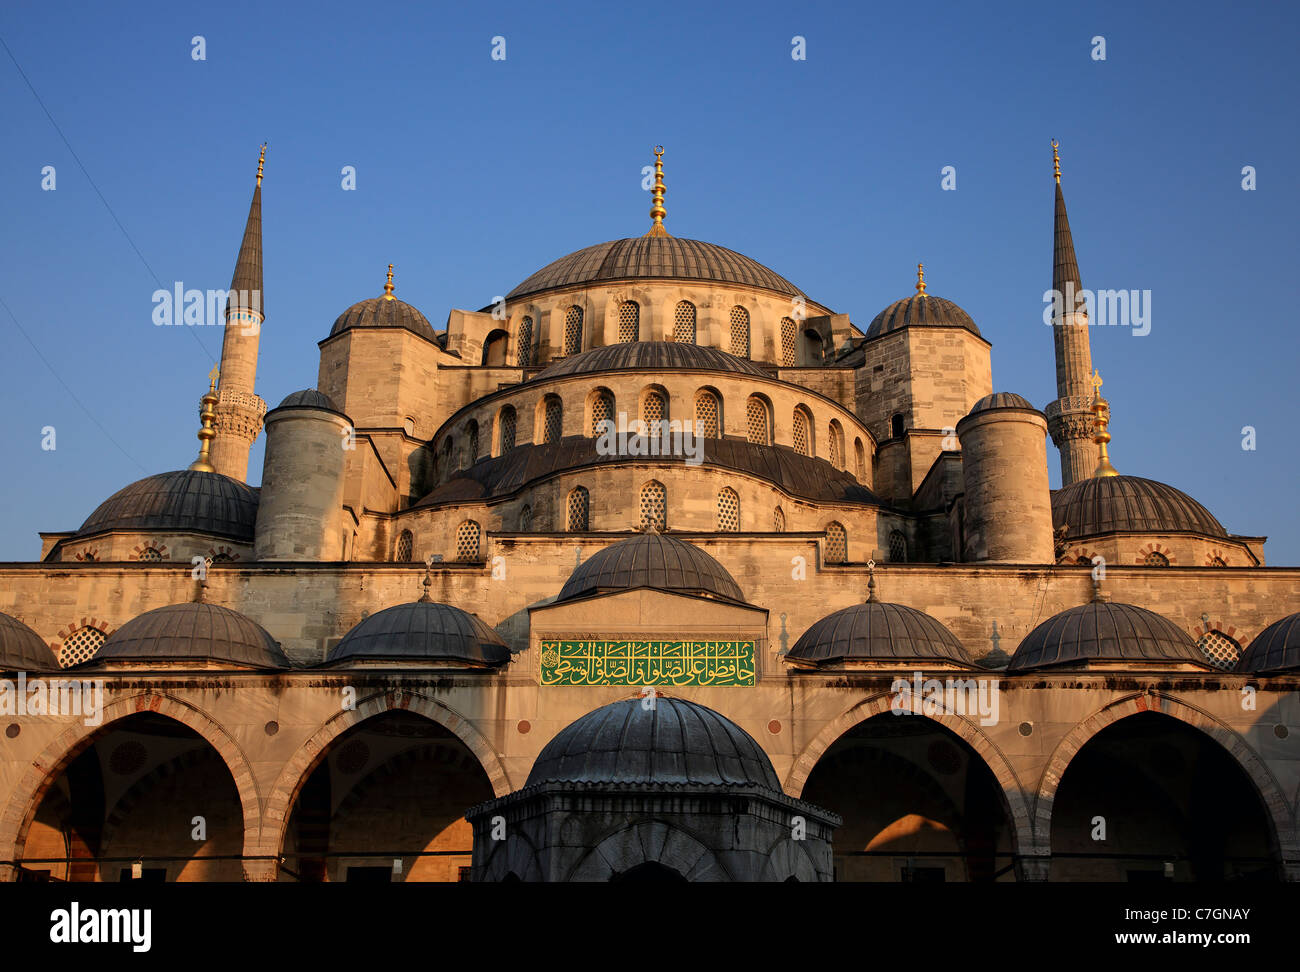 Partial view of the Blue Mosque (Sultanahmet Camii) with 2 of its 6 minarets, Istanbul, Turkey. Stock Photo